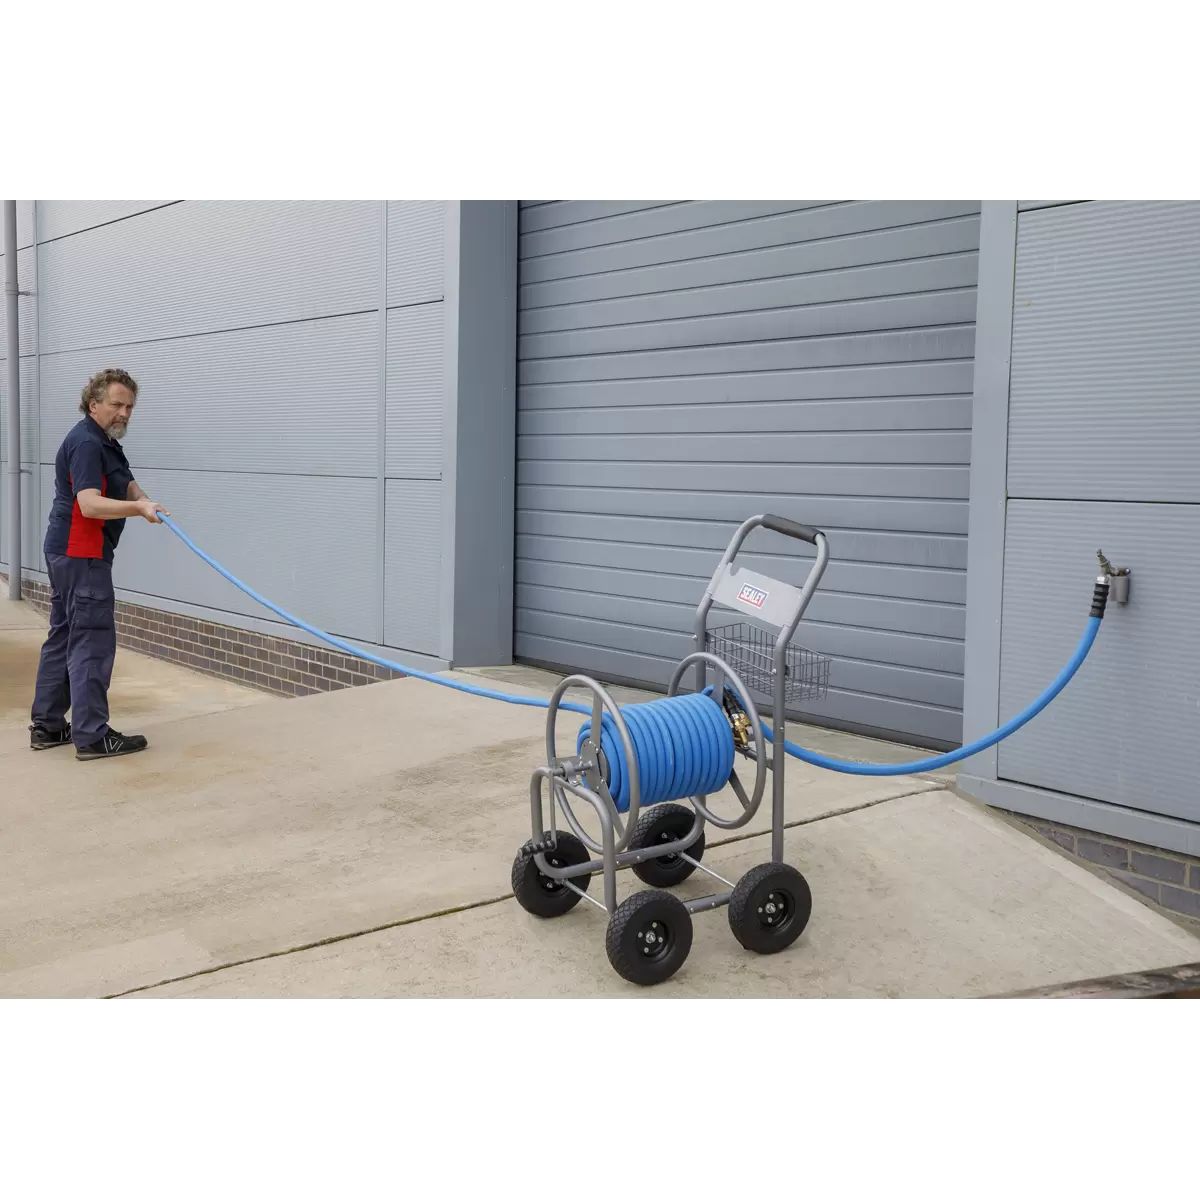 Sealey HRKIT5 Heavy-Duty Hose Reel Cart with 5m Hot & Cold Rubber Water Hose